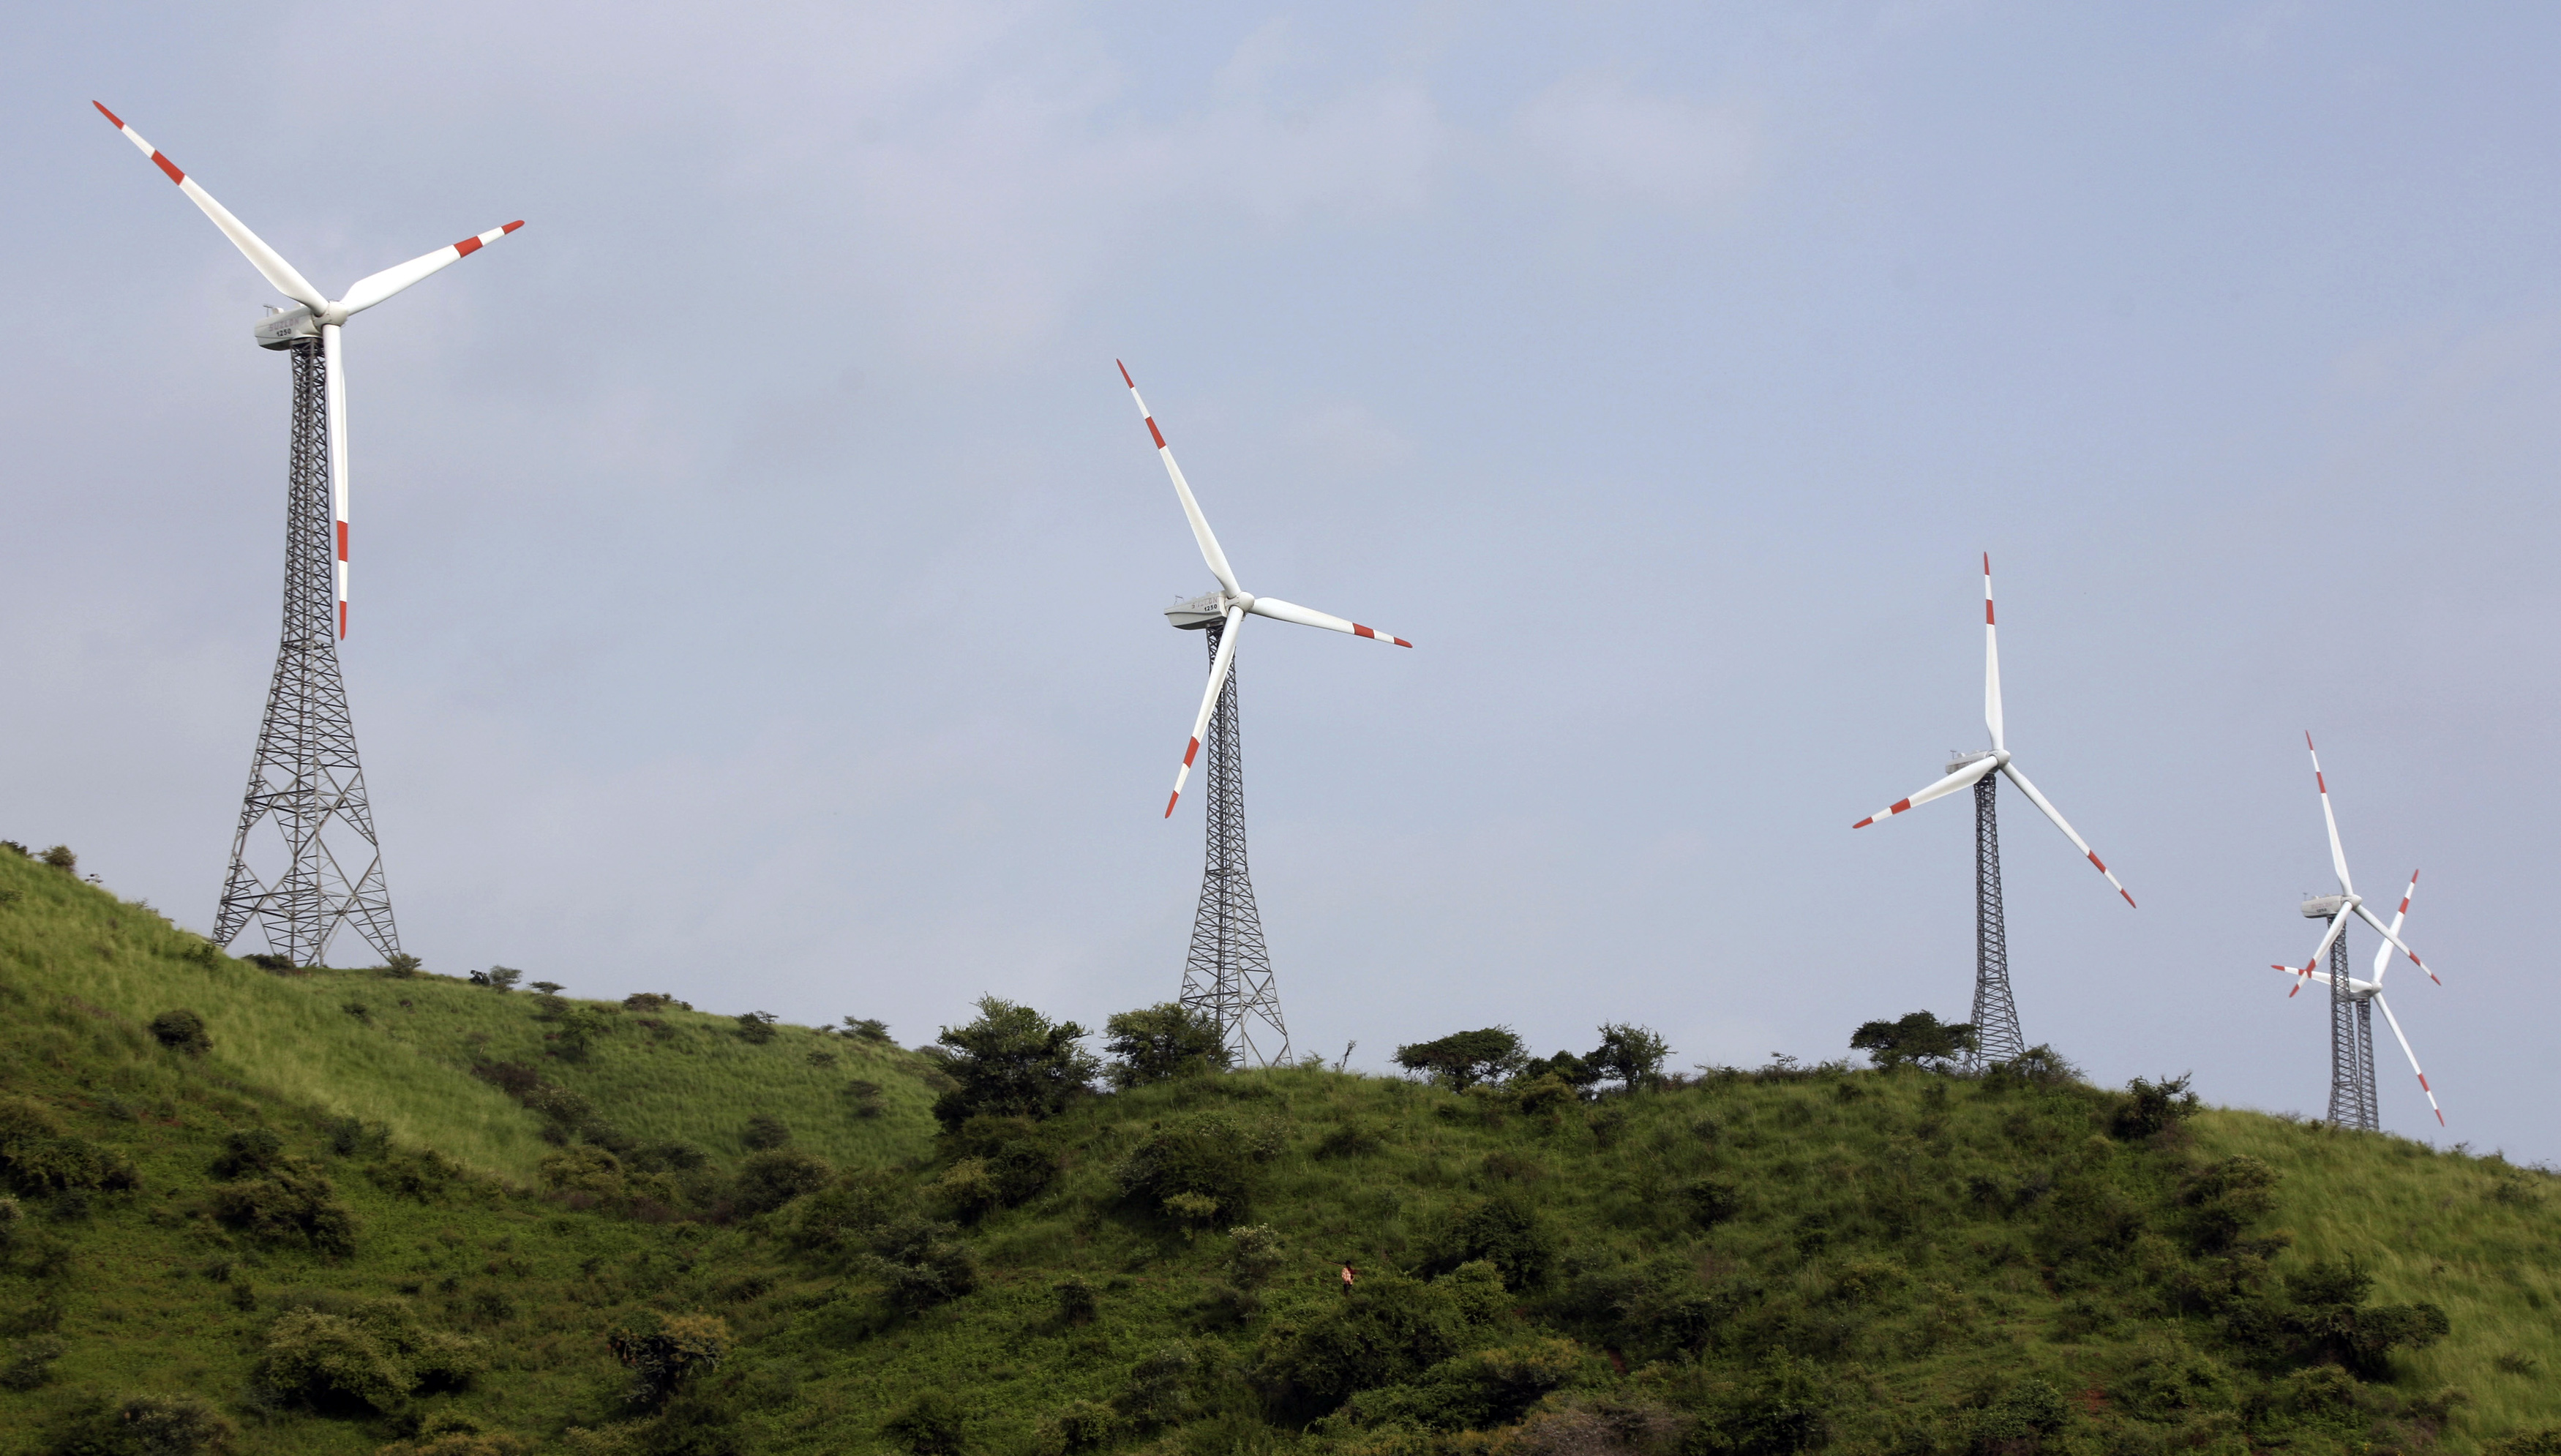 Power-generating windmill turbines are pictured in Suzlon wind farm at Sanodar village, west of the Indian city of Ahmedabad, September 8, 2009.